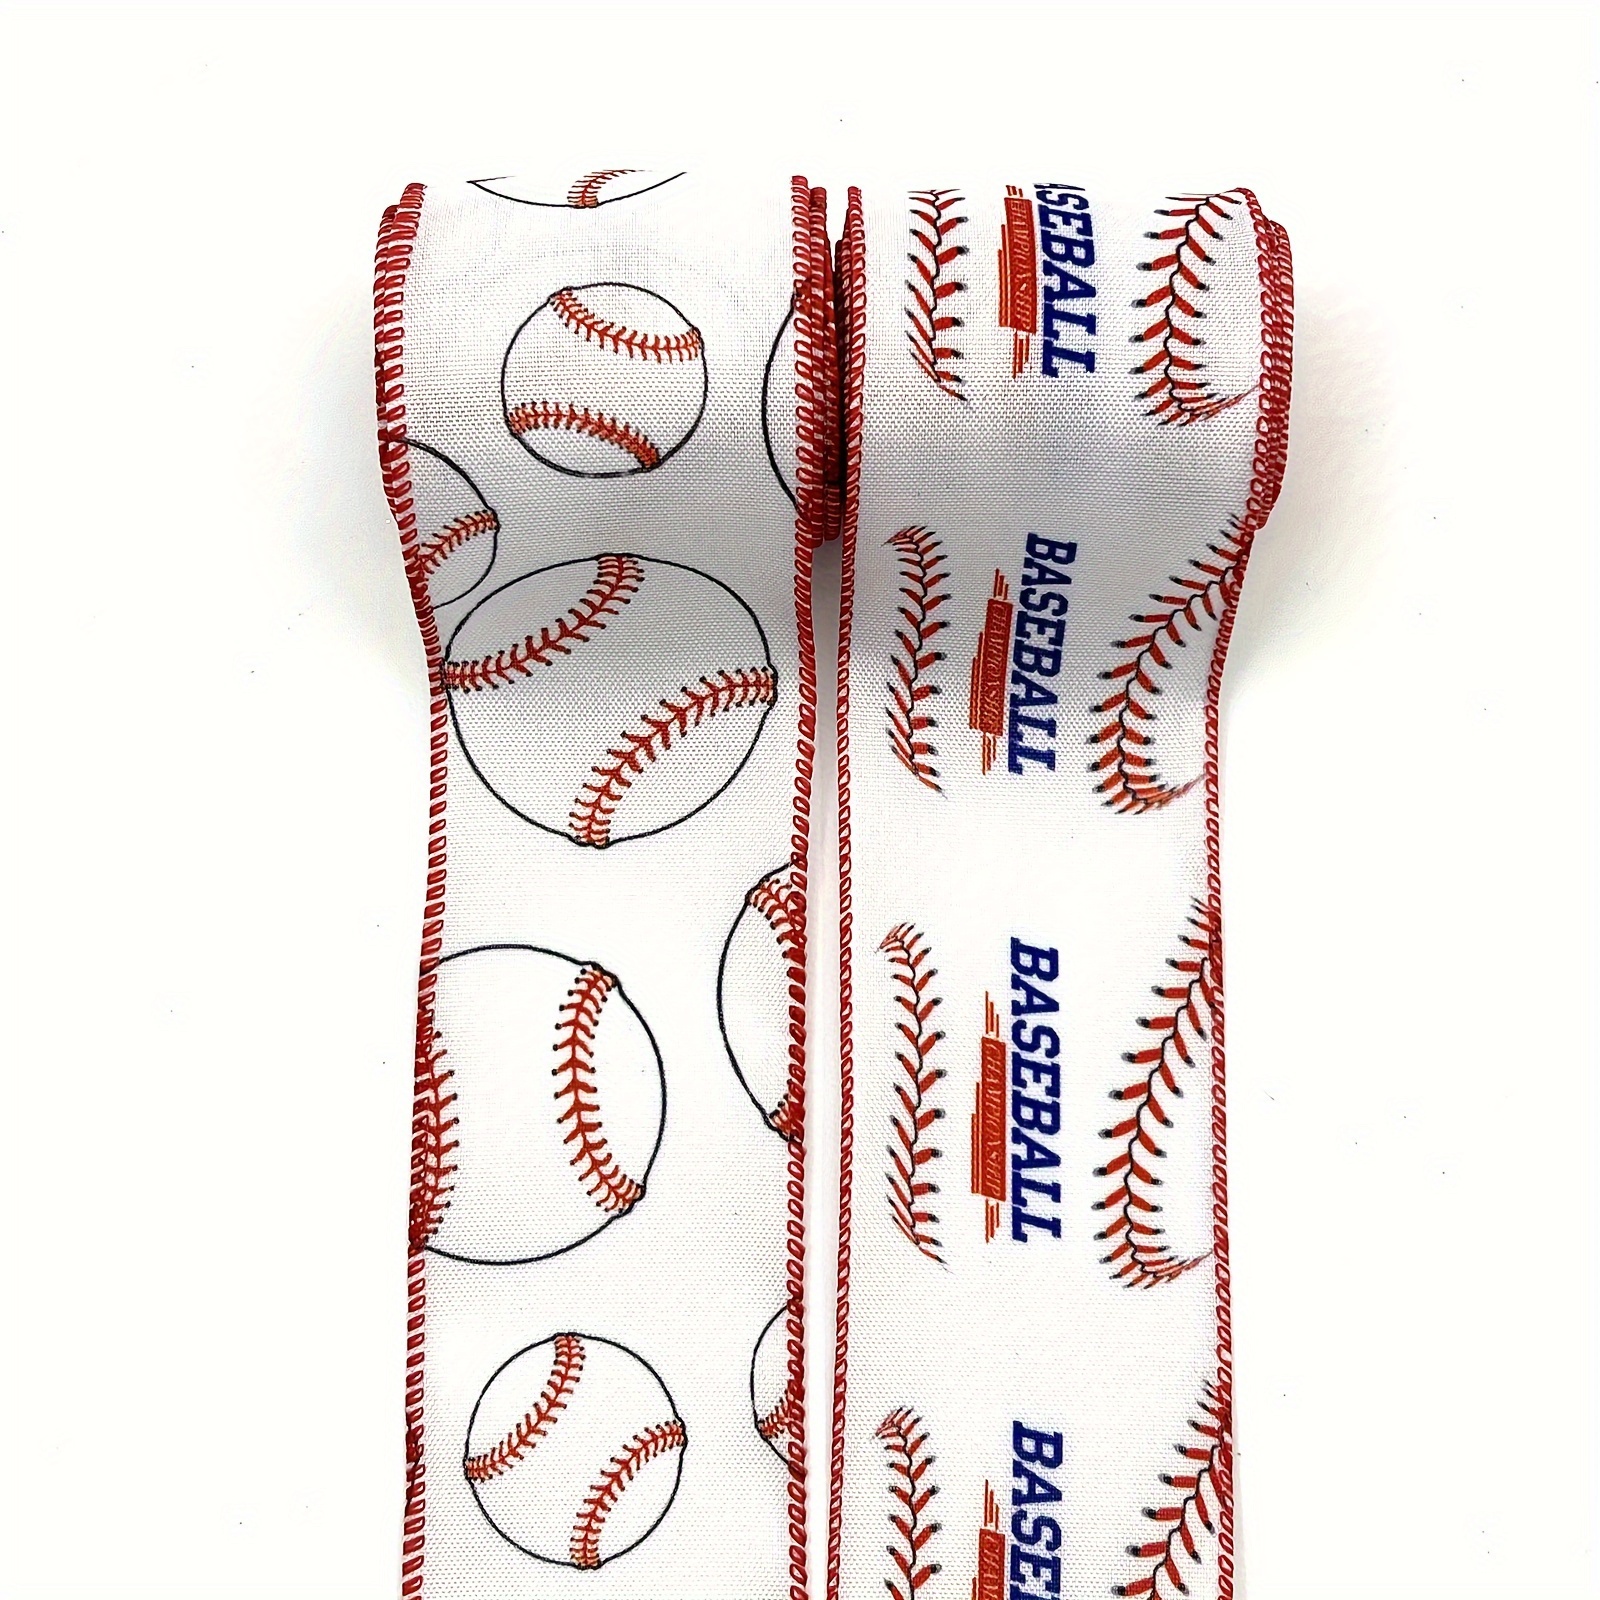 2 Rolls 20 Yards Baseball Ribbons Red White Wired Edge Fabric Ribbons 1.5  Inch Sport Stitching Satin Wired Ribbon for Present Wrapping DIY Crafts